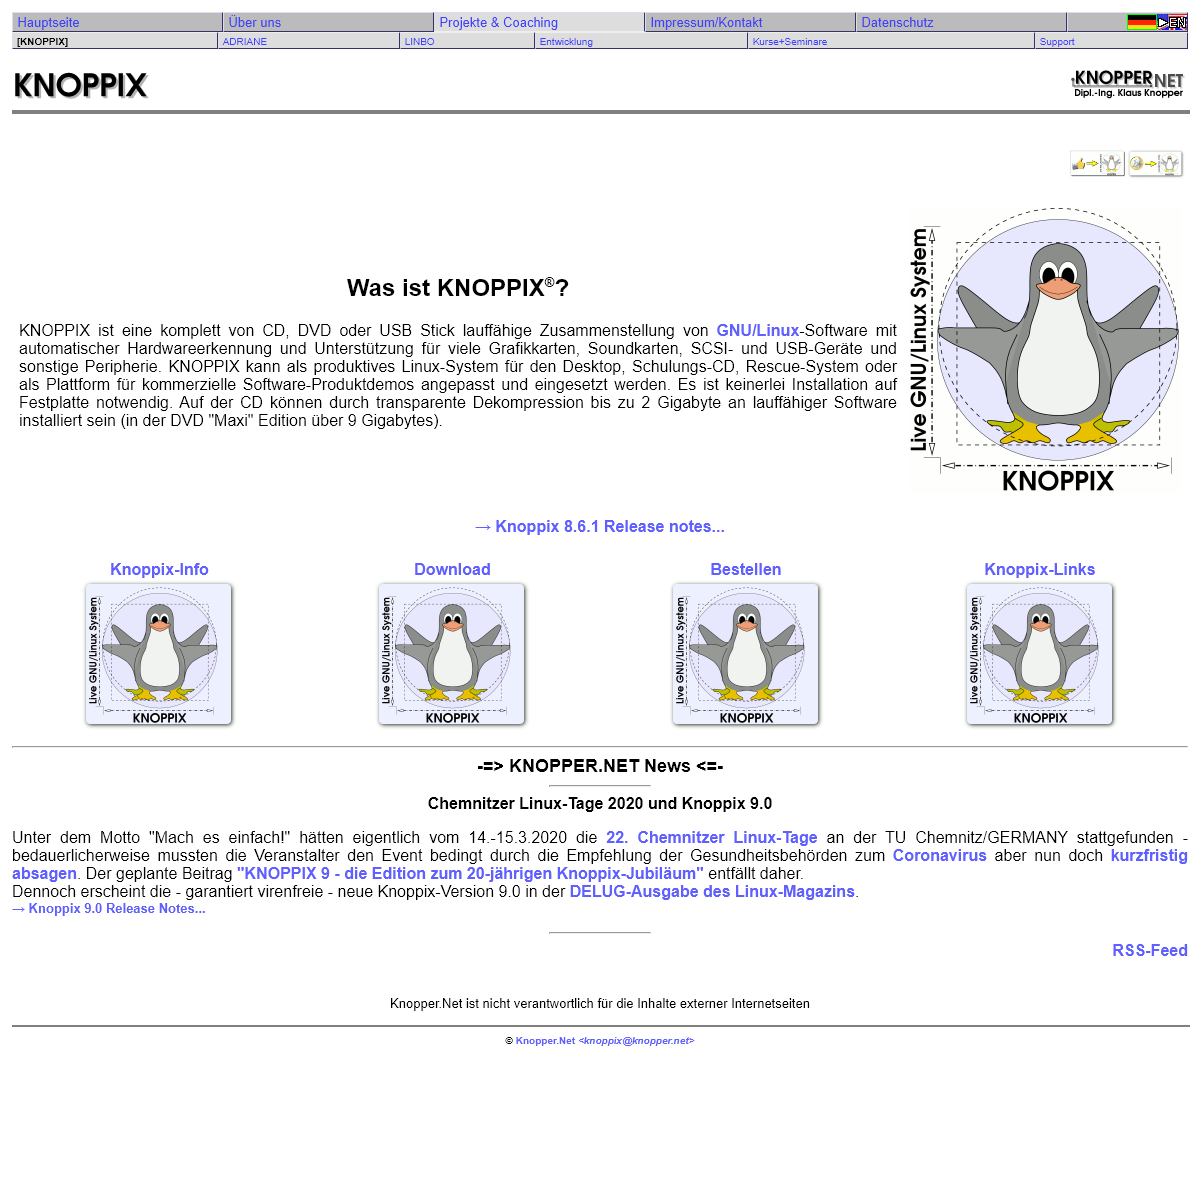 A complete backup of knoppix.org